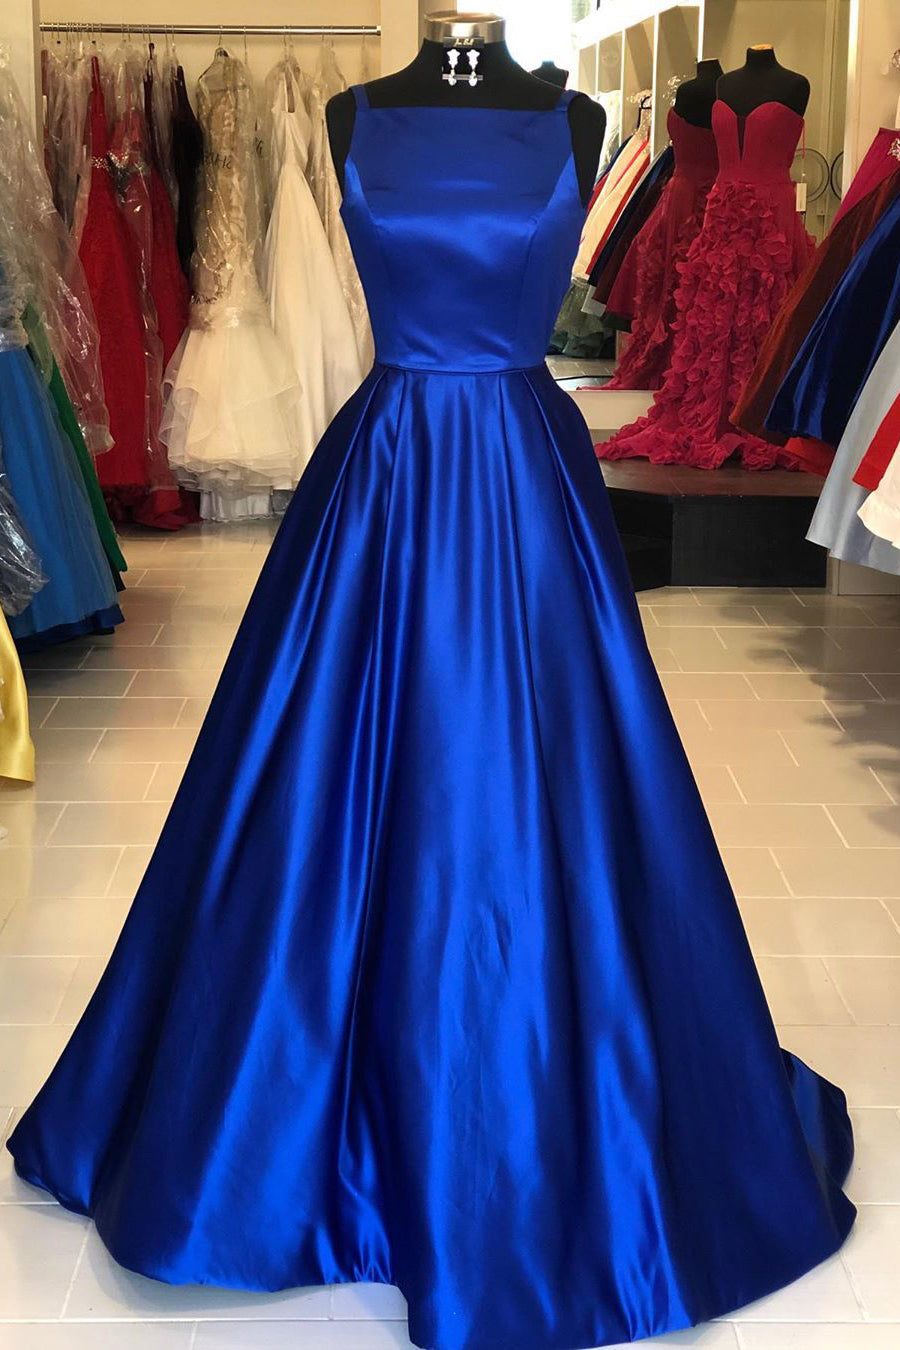 Hollow Out Royal Blue Satin Long Corset Prom Dress outfits, Formal Dress Australia